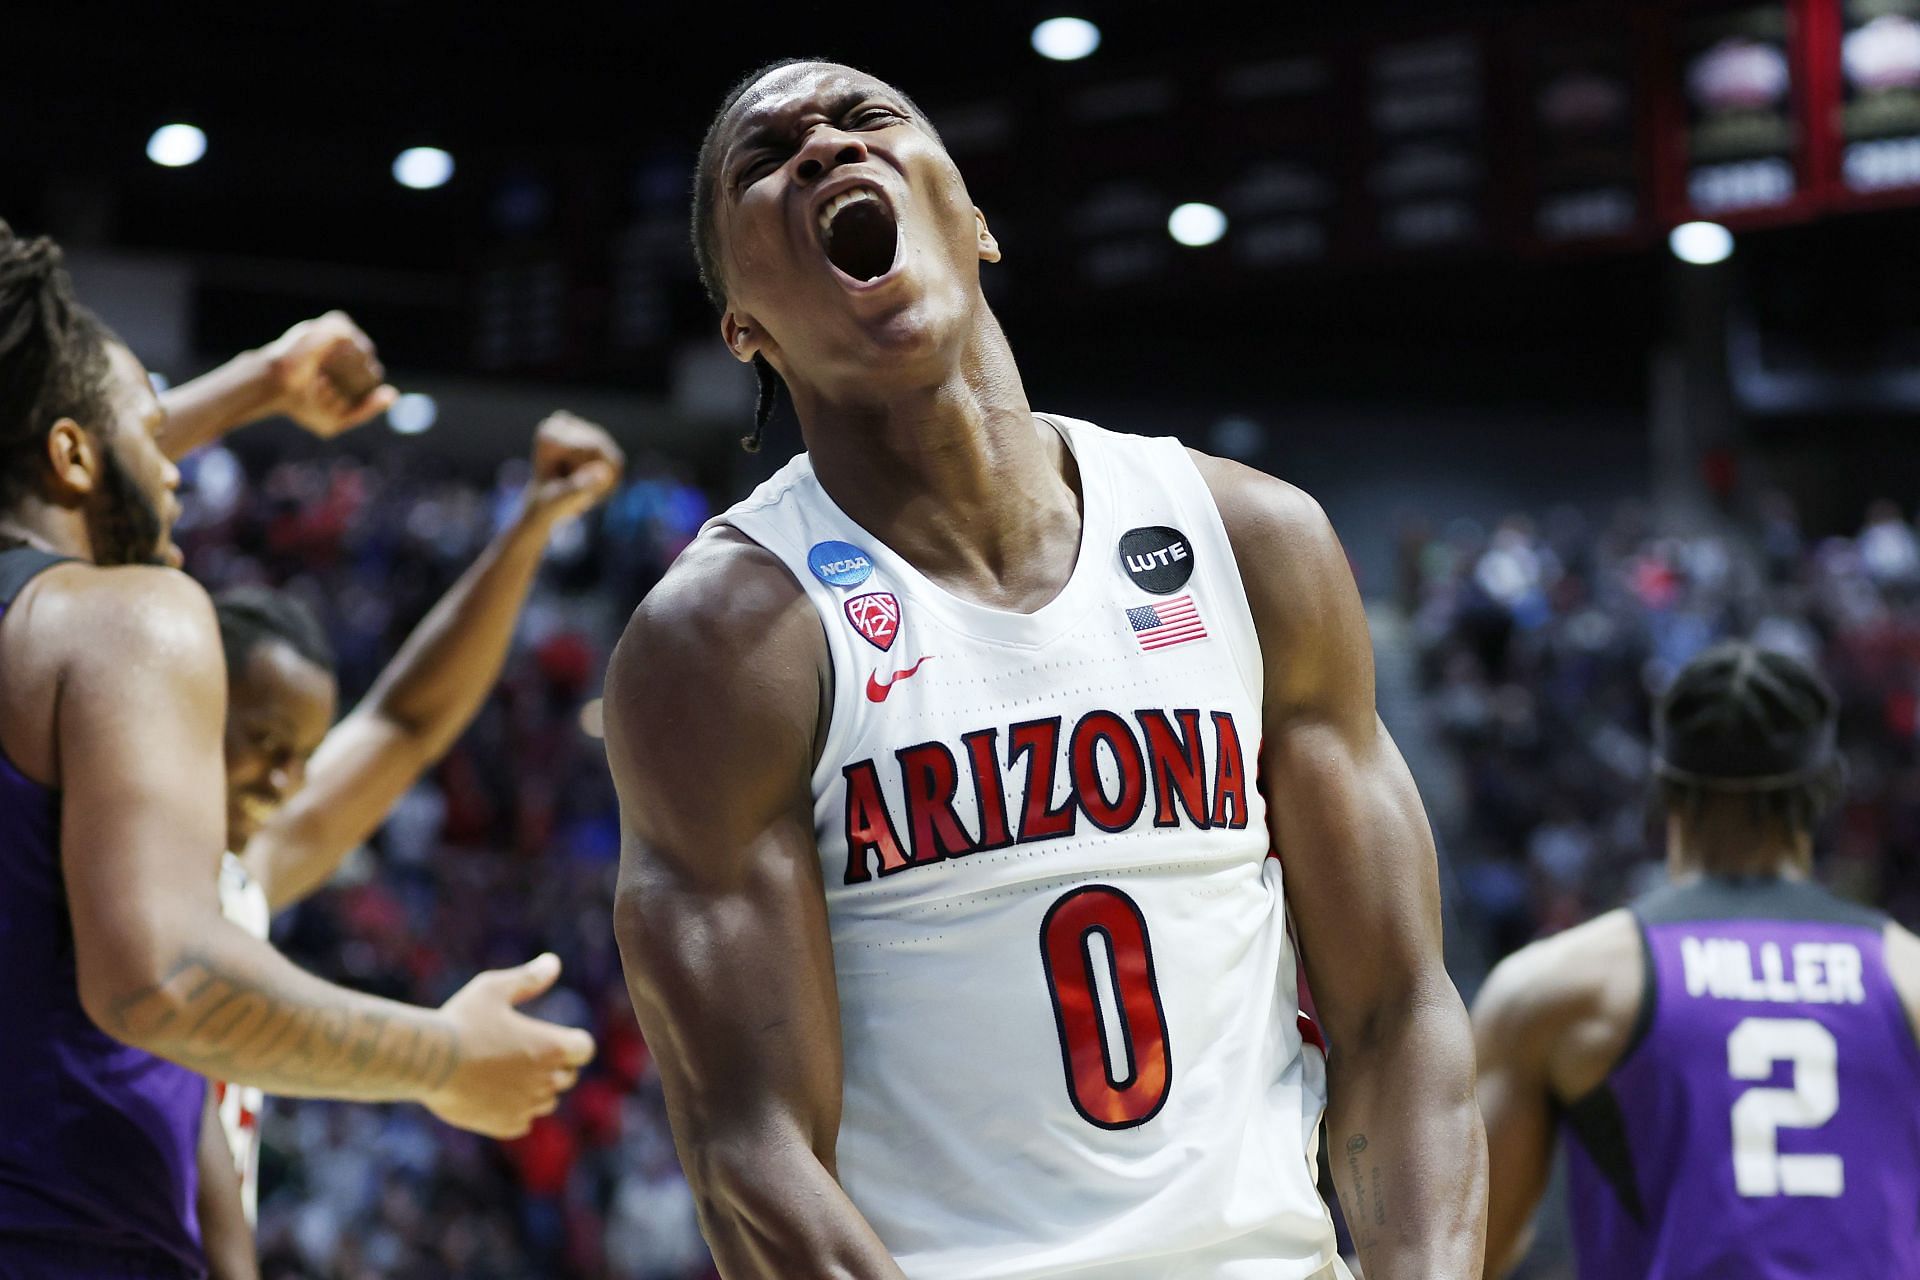 Arizona wing Bennedict Mathurin has been connected to the Indiana Pacers in the NBA Draft